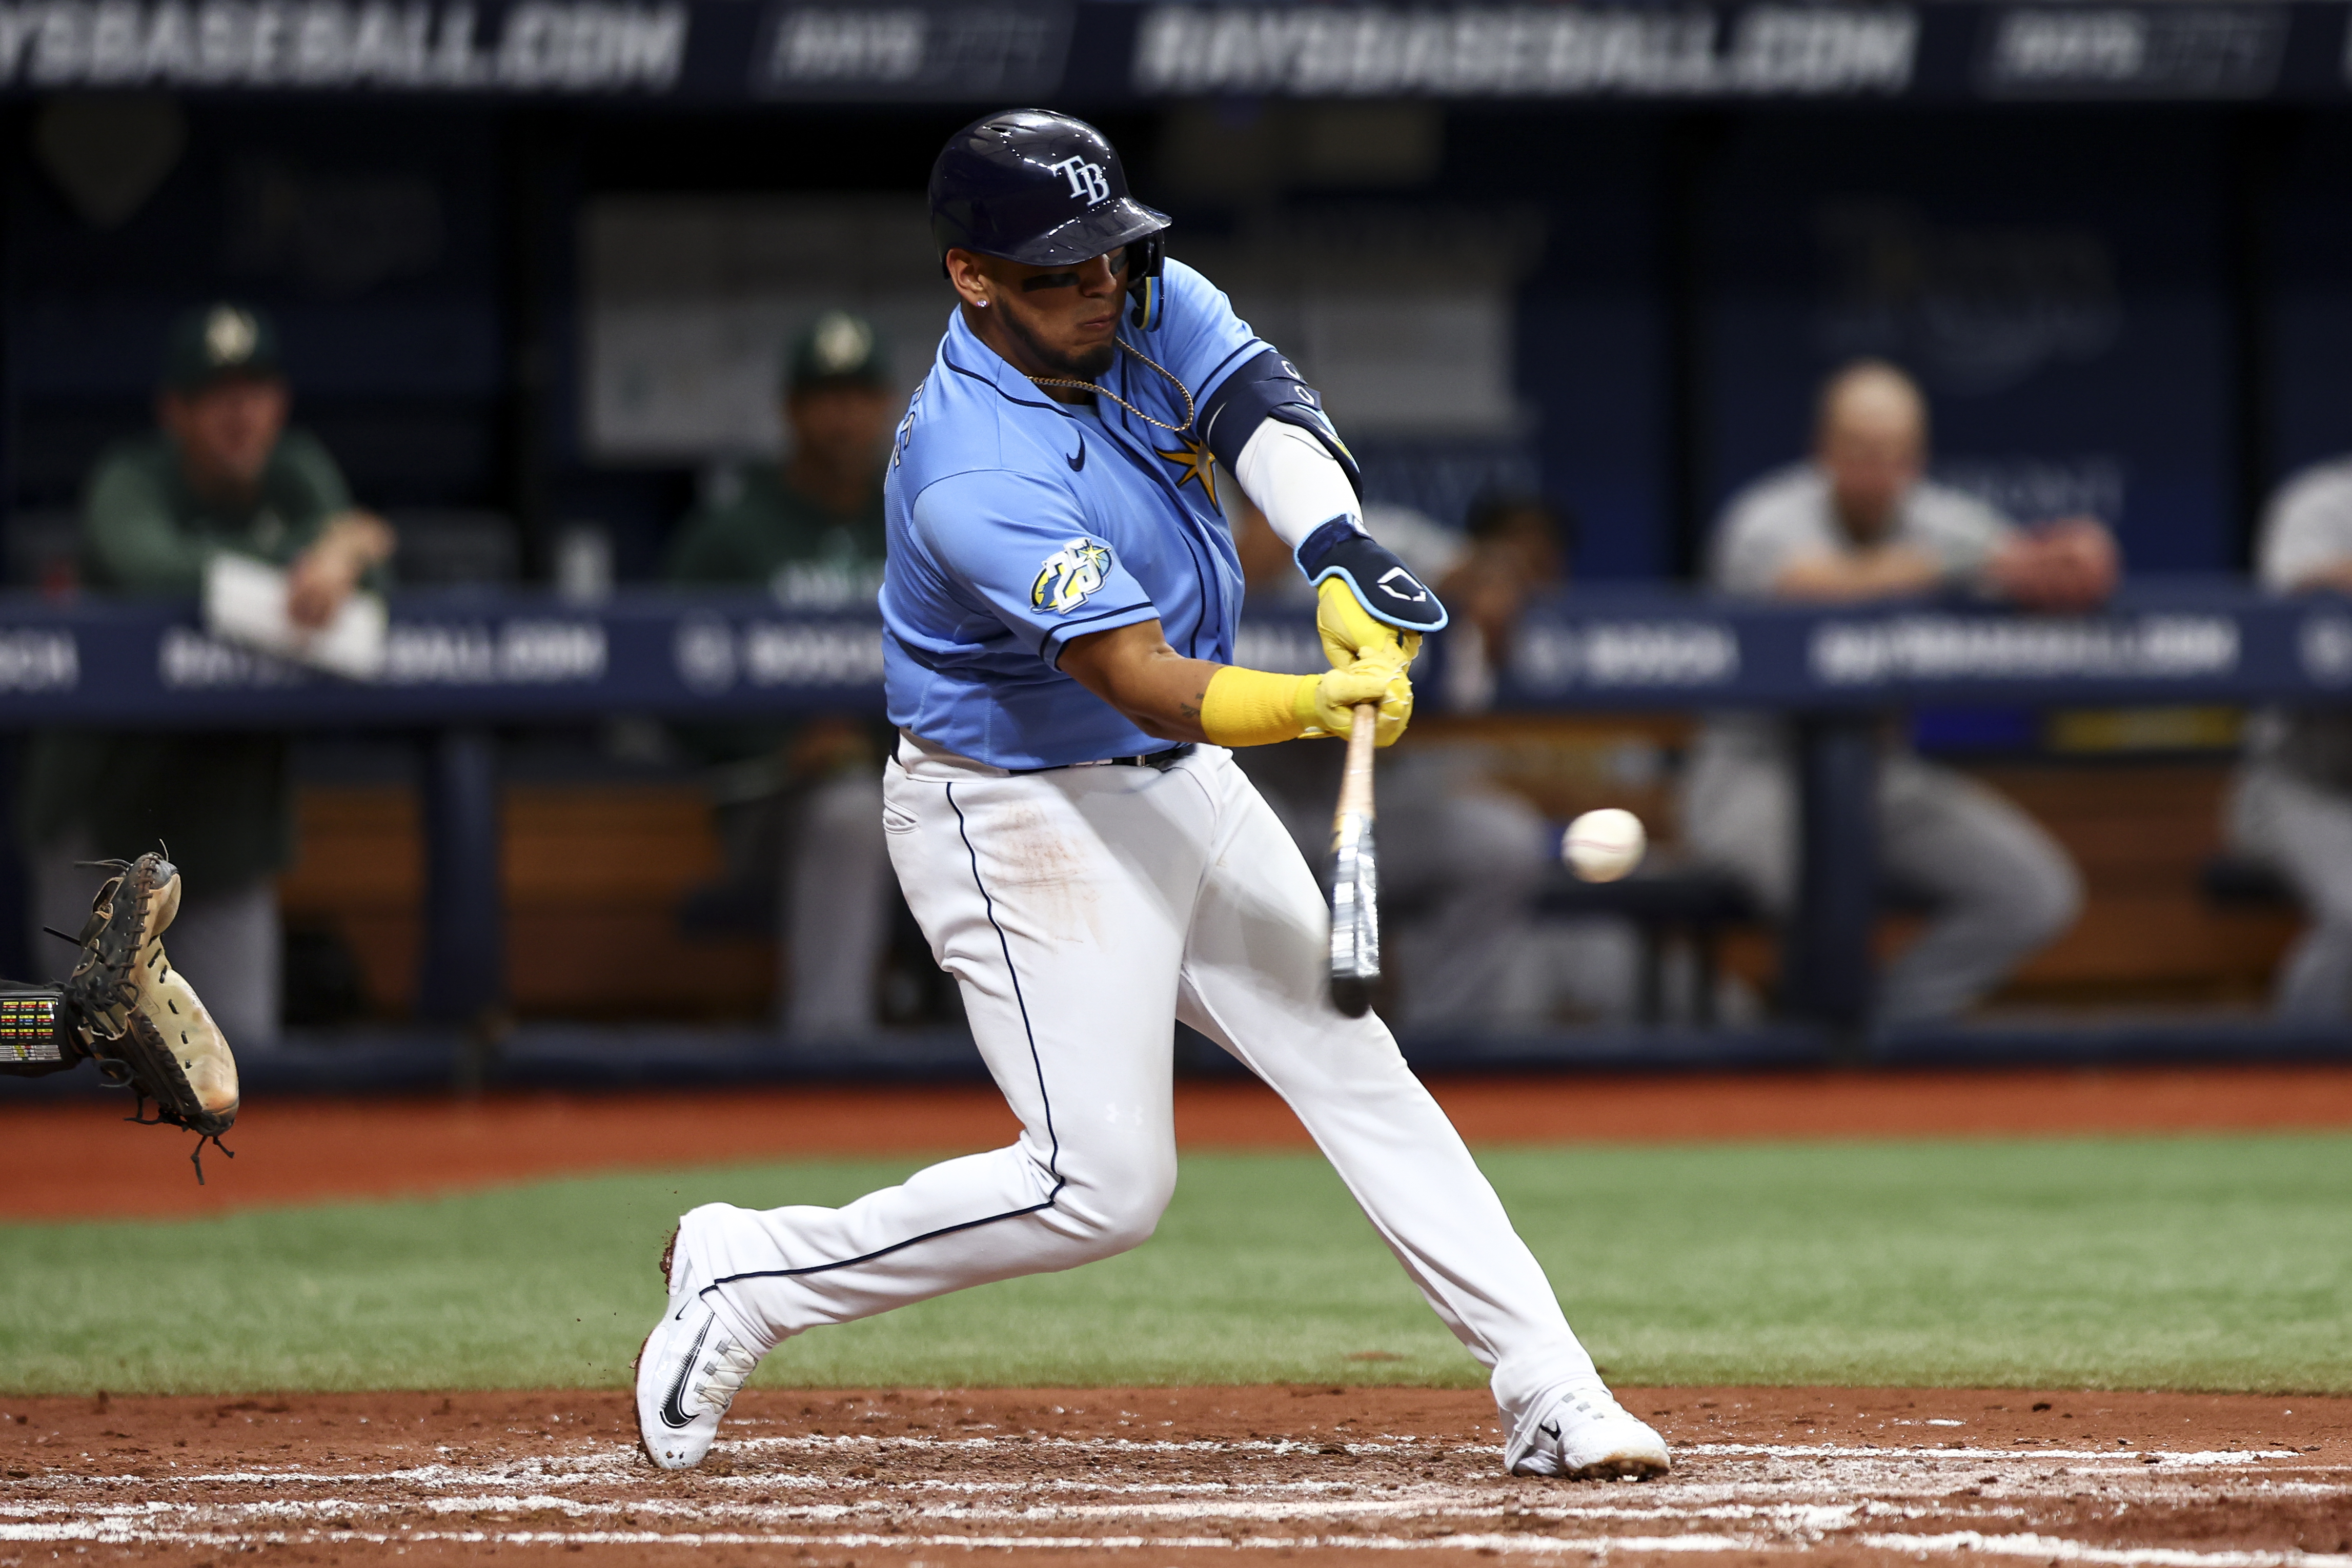 Isaac Paredes of the Tampa Bay Rays hits during the fourth inning in the game against the Oakland Athletics at Tropicana Field in St. Petersburg, Florida, April 8, 2023. /CFP